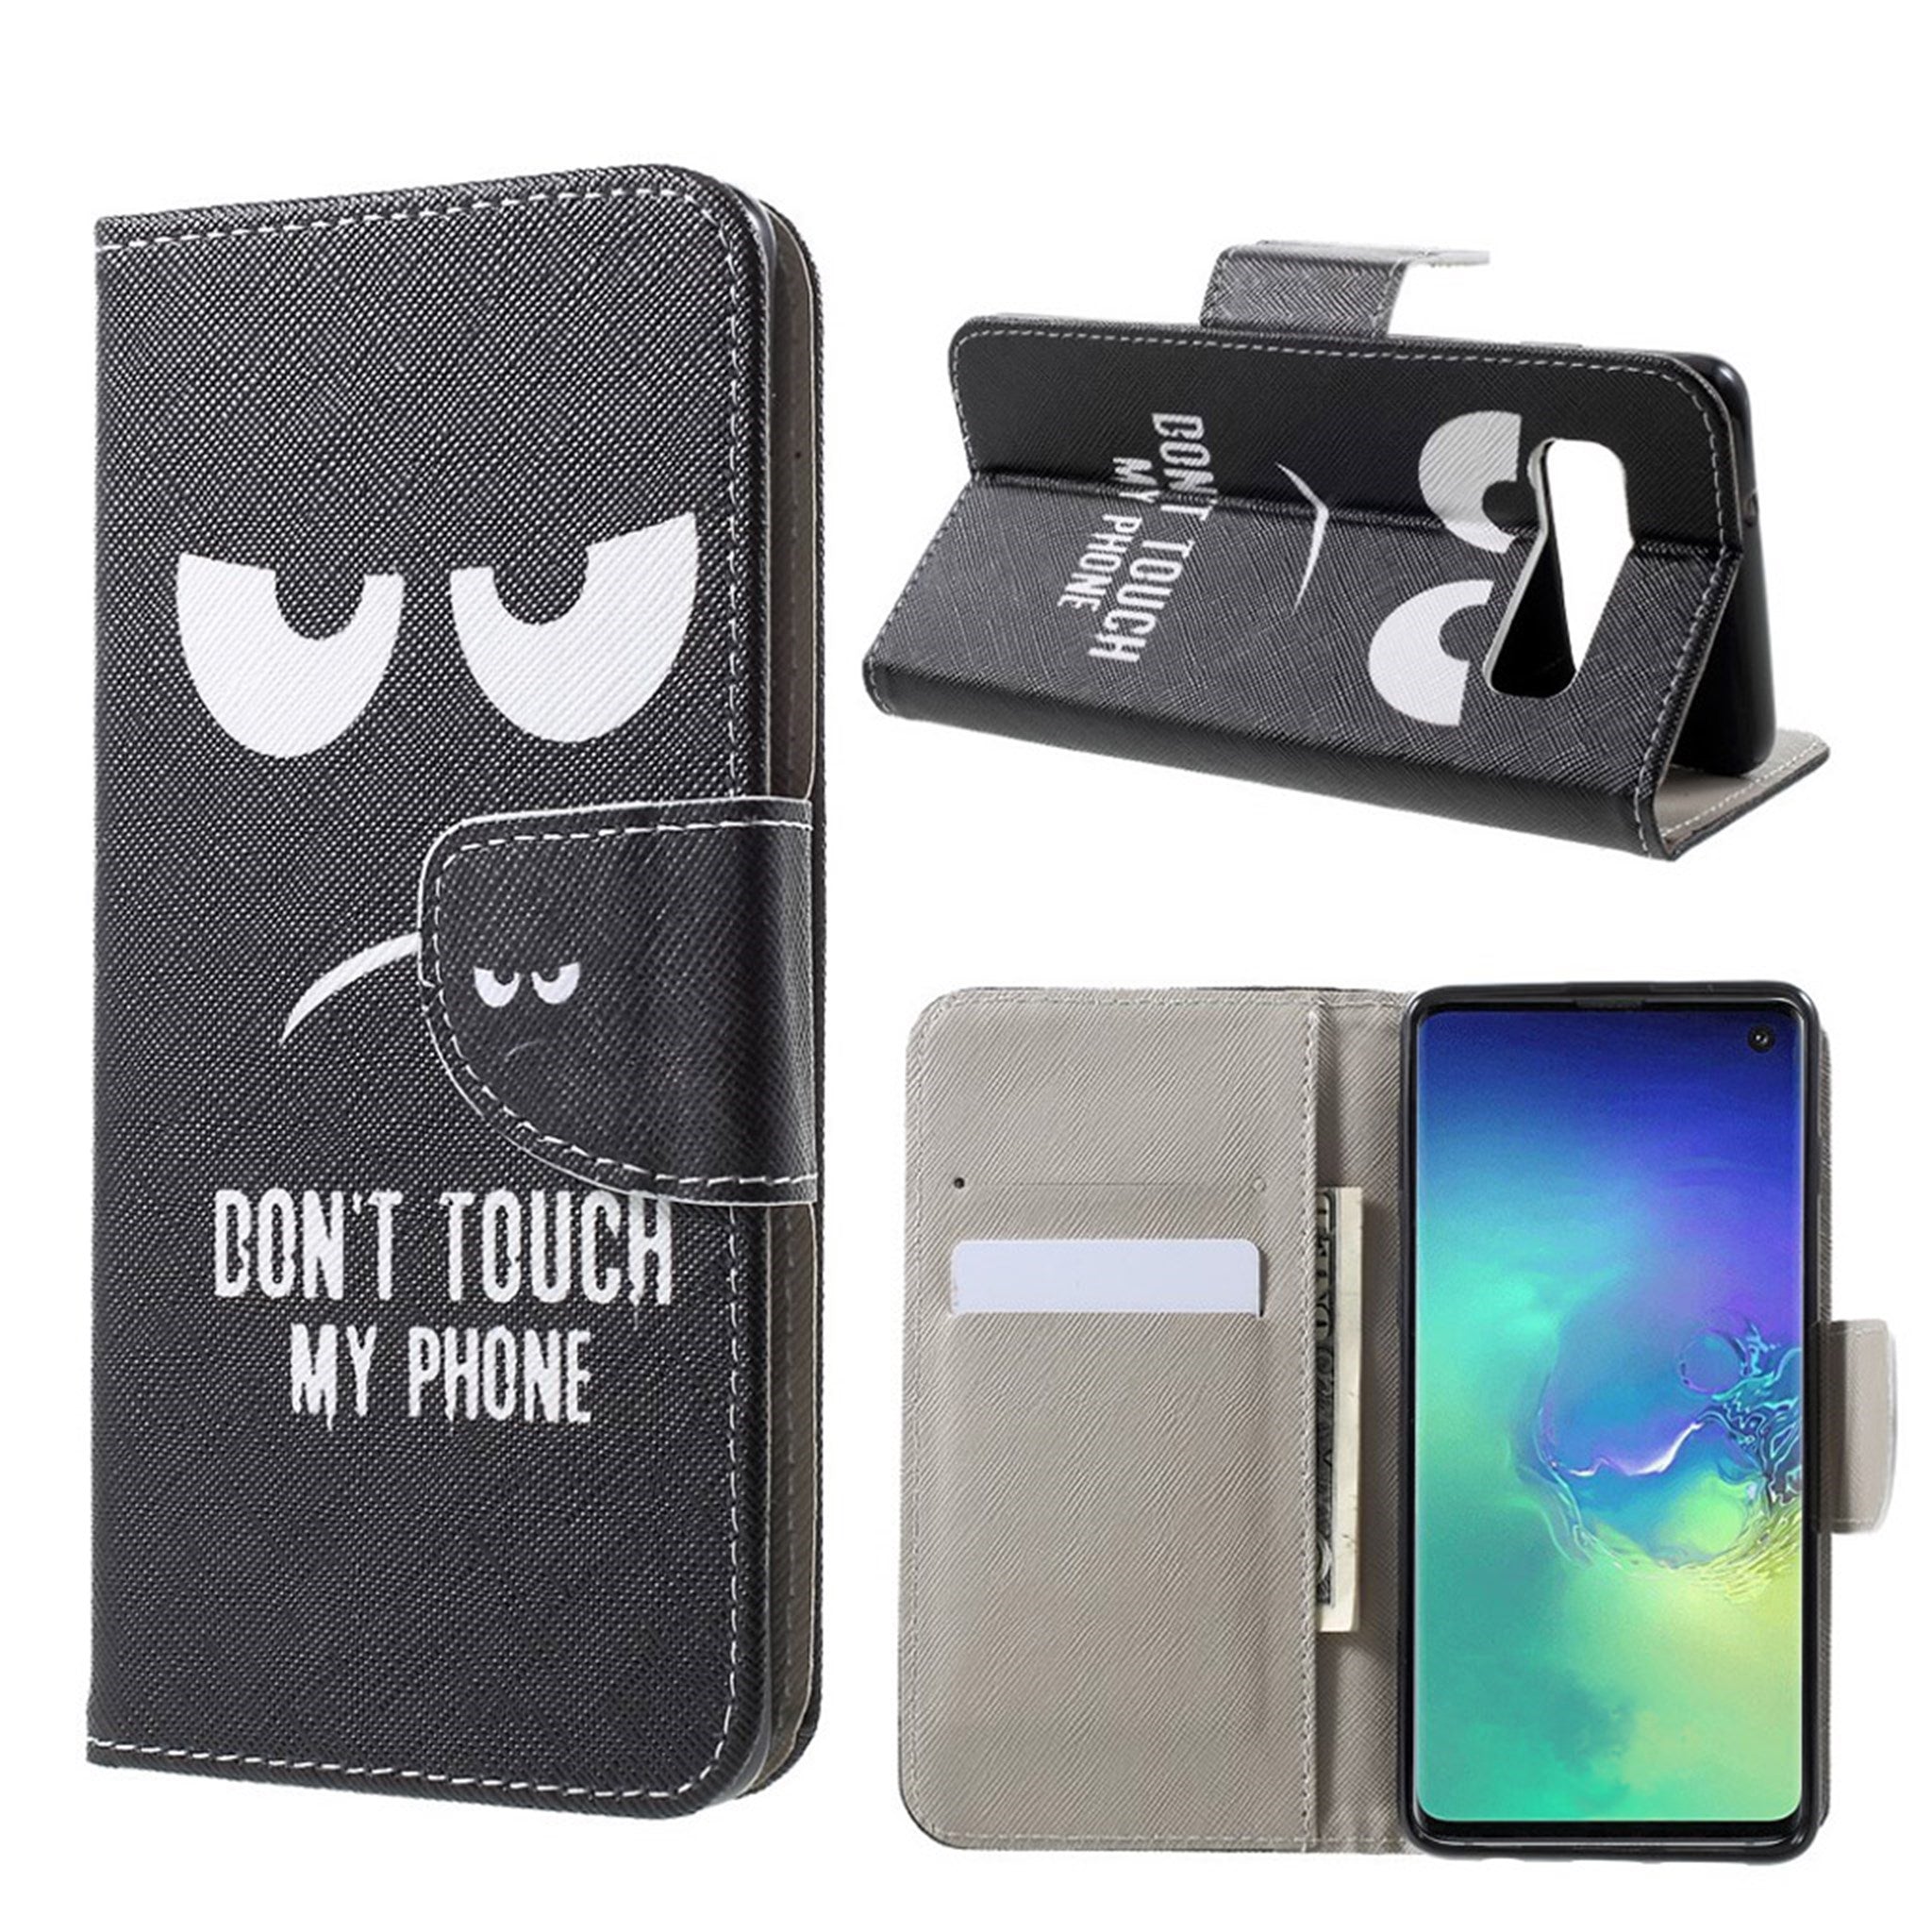 Samsung Galaxy S10 cross texture leather flip case - Do Not Touch My Phone